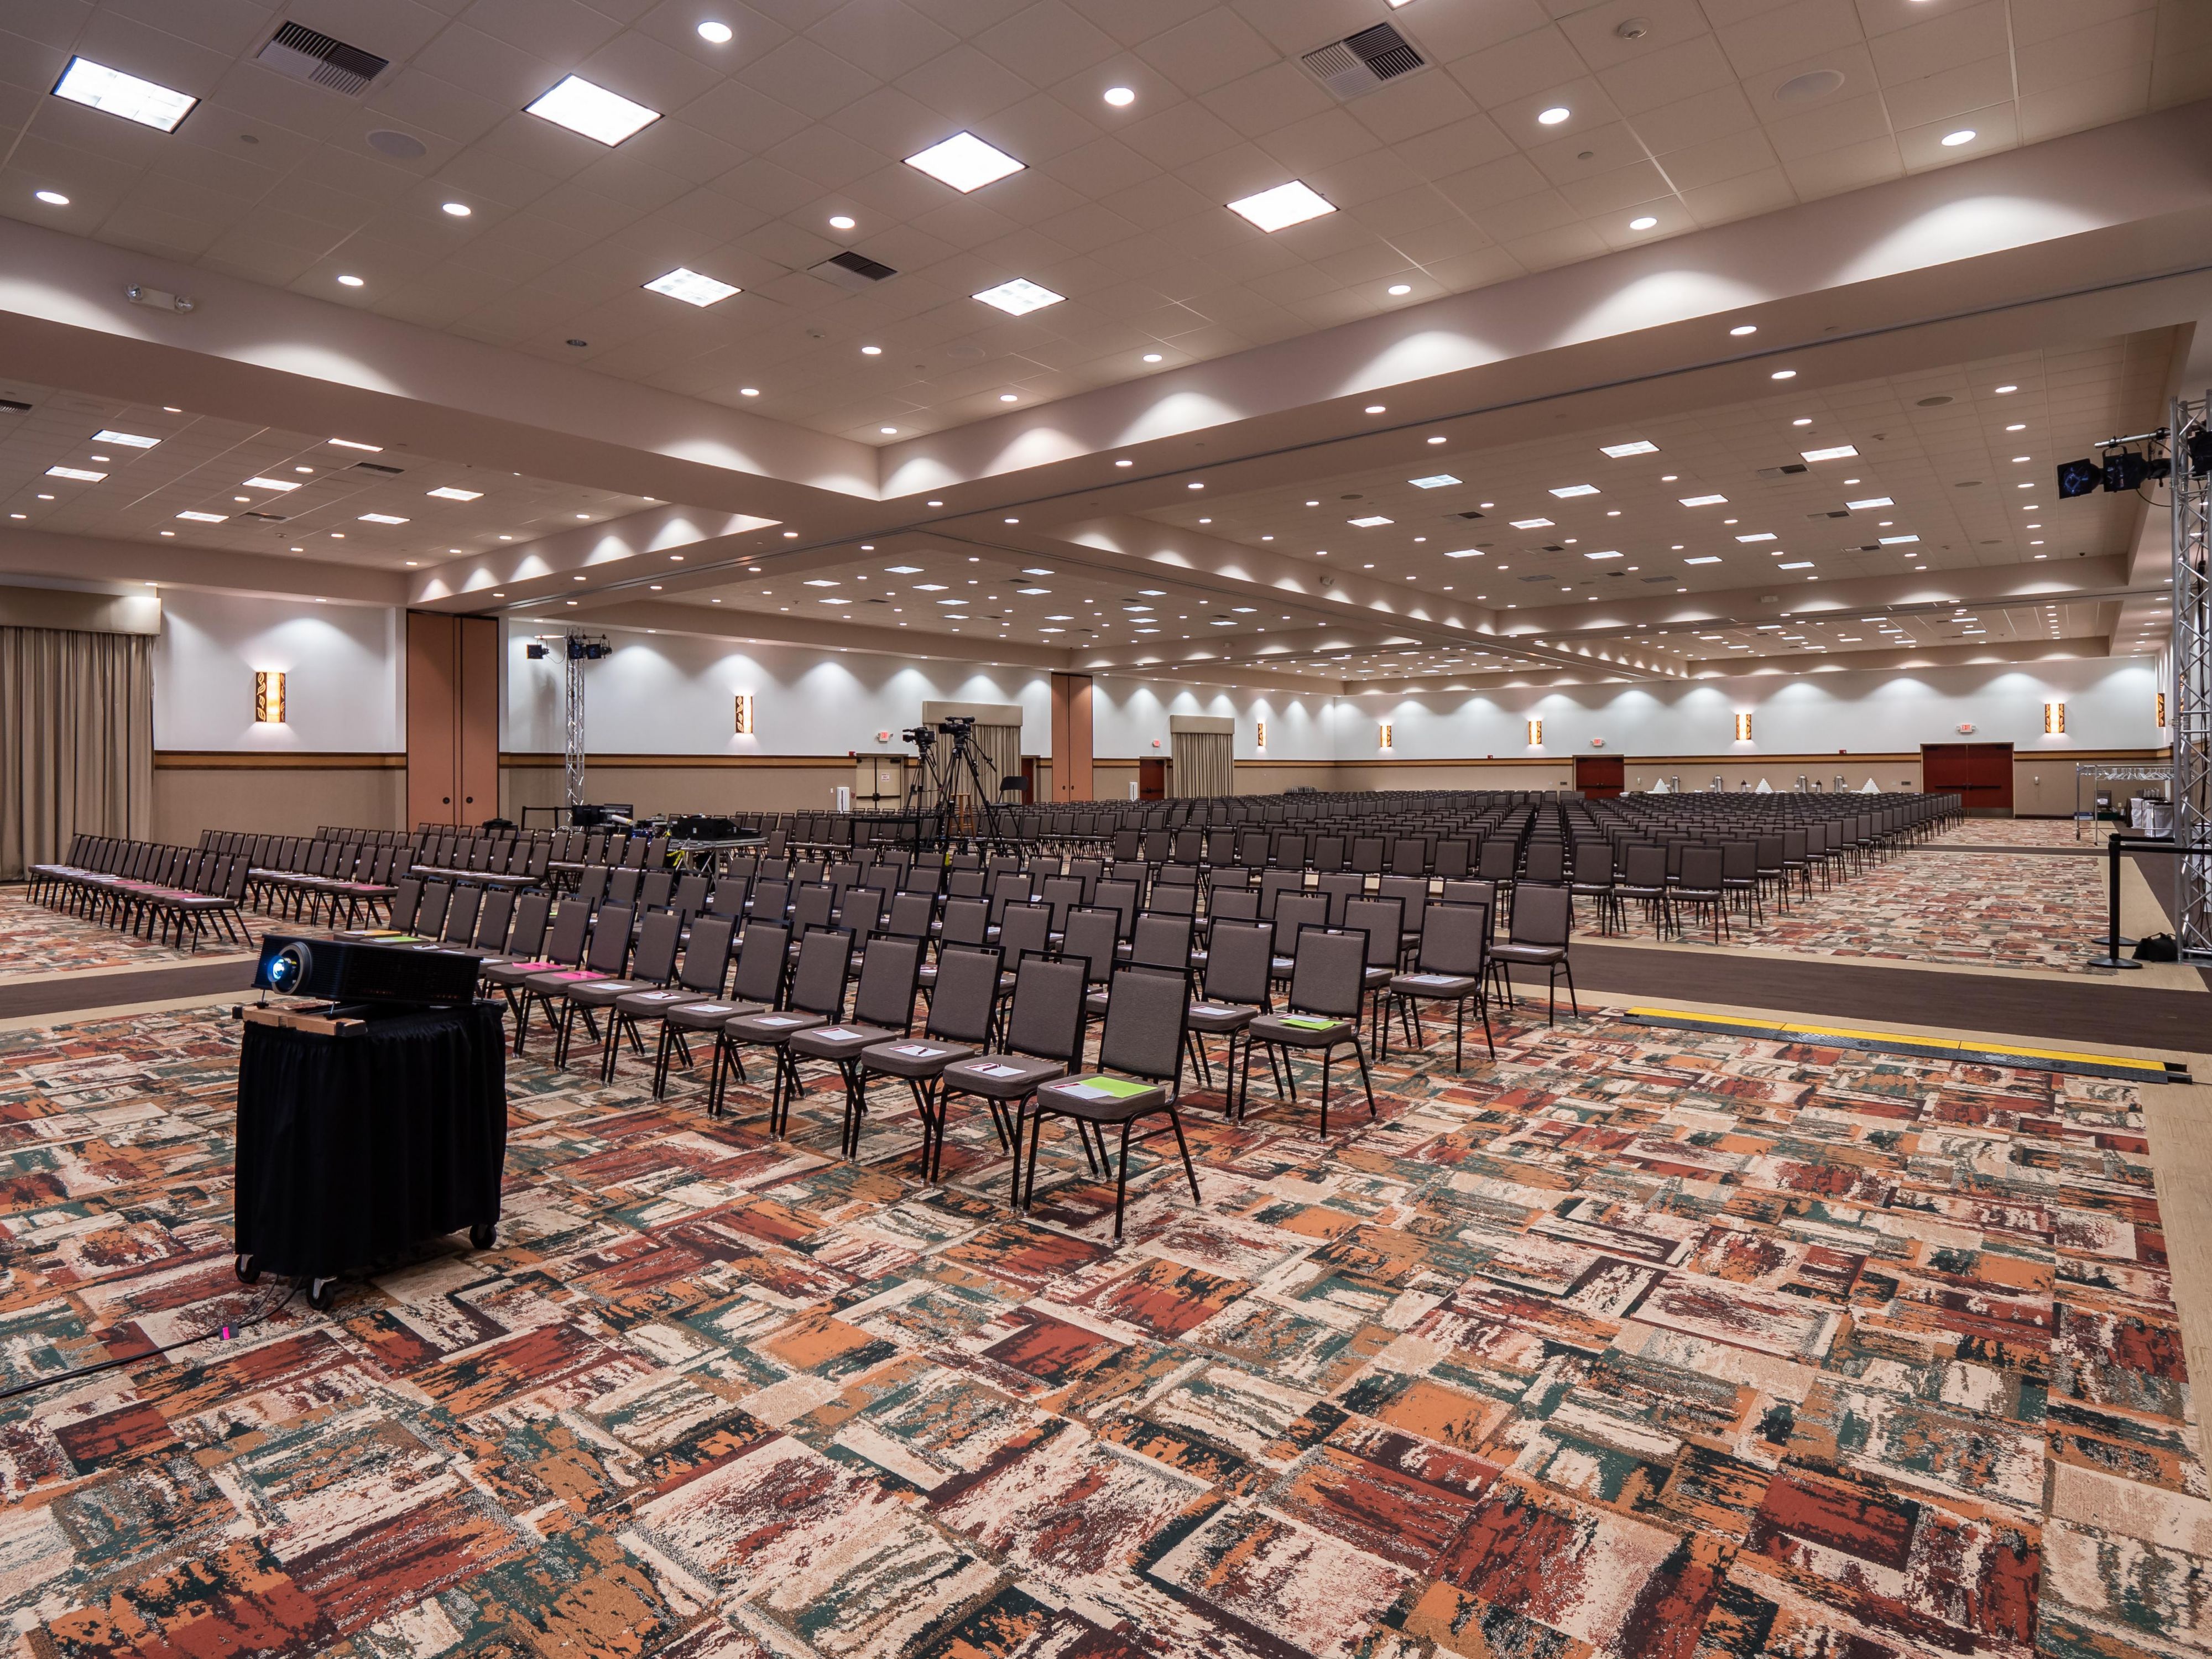 We offer discounted group rates for your business and event needs! Our highly qualified staff will help you plan your event. With 16 rooms and more than 38,000 sq. ft of meeting space and two large flexible ballrooms, we can accommodate events of any size.